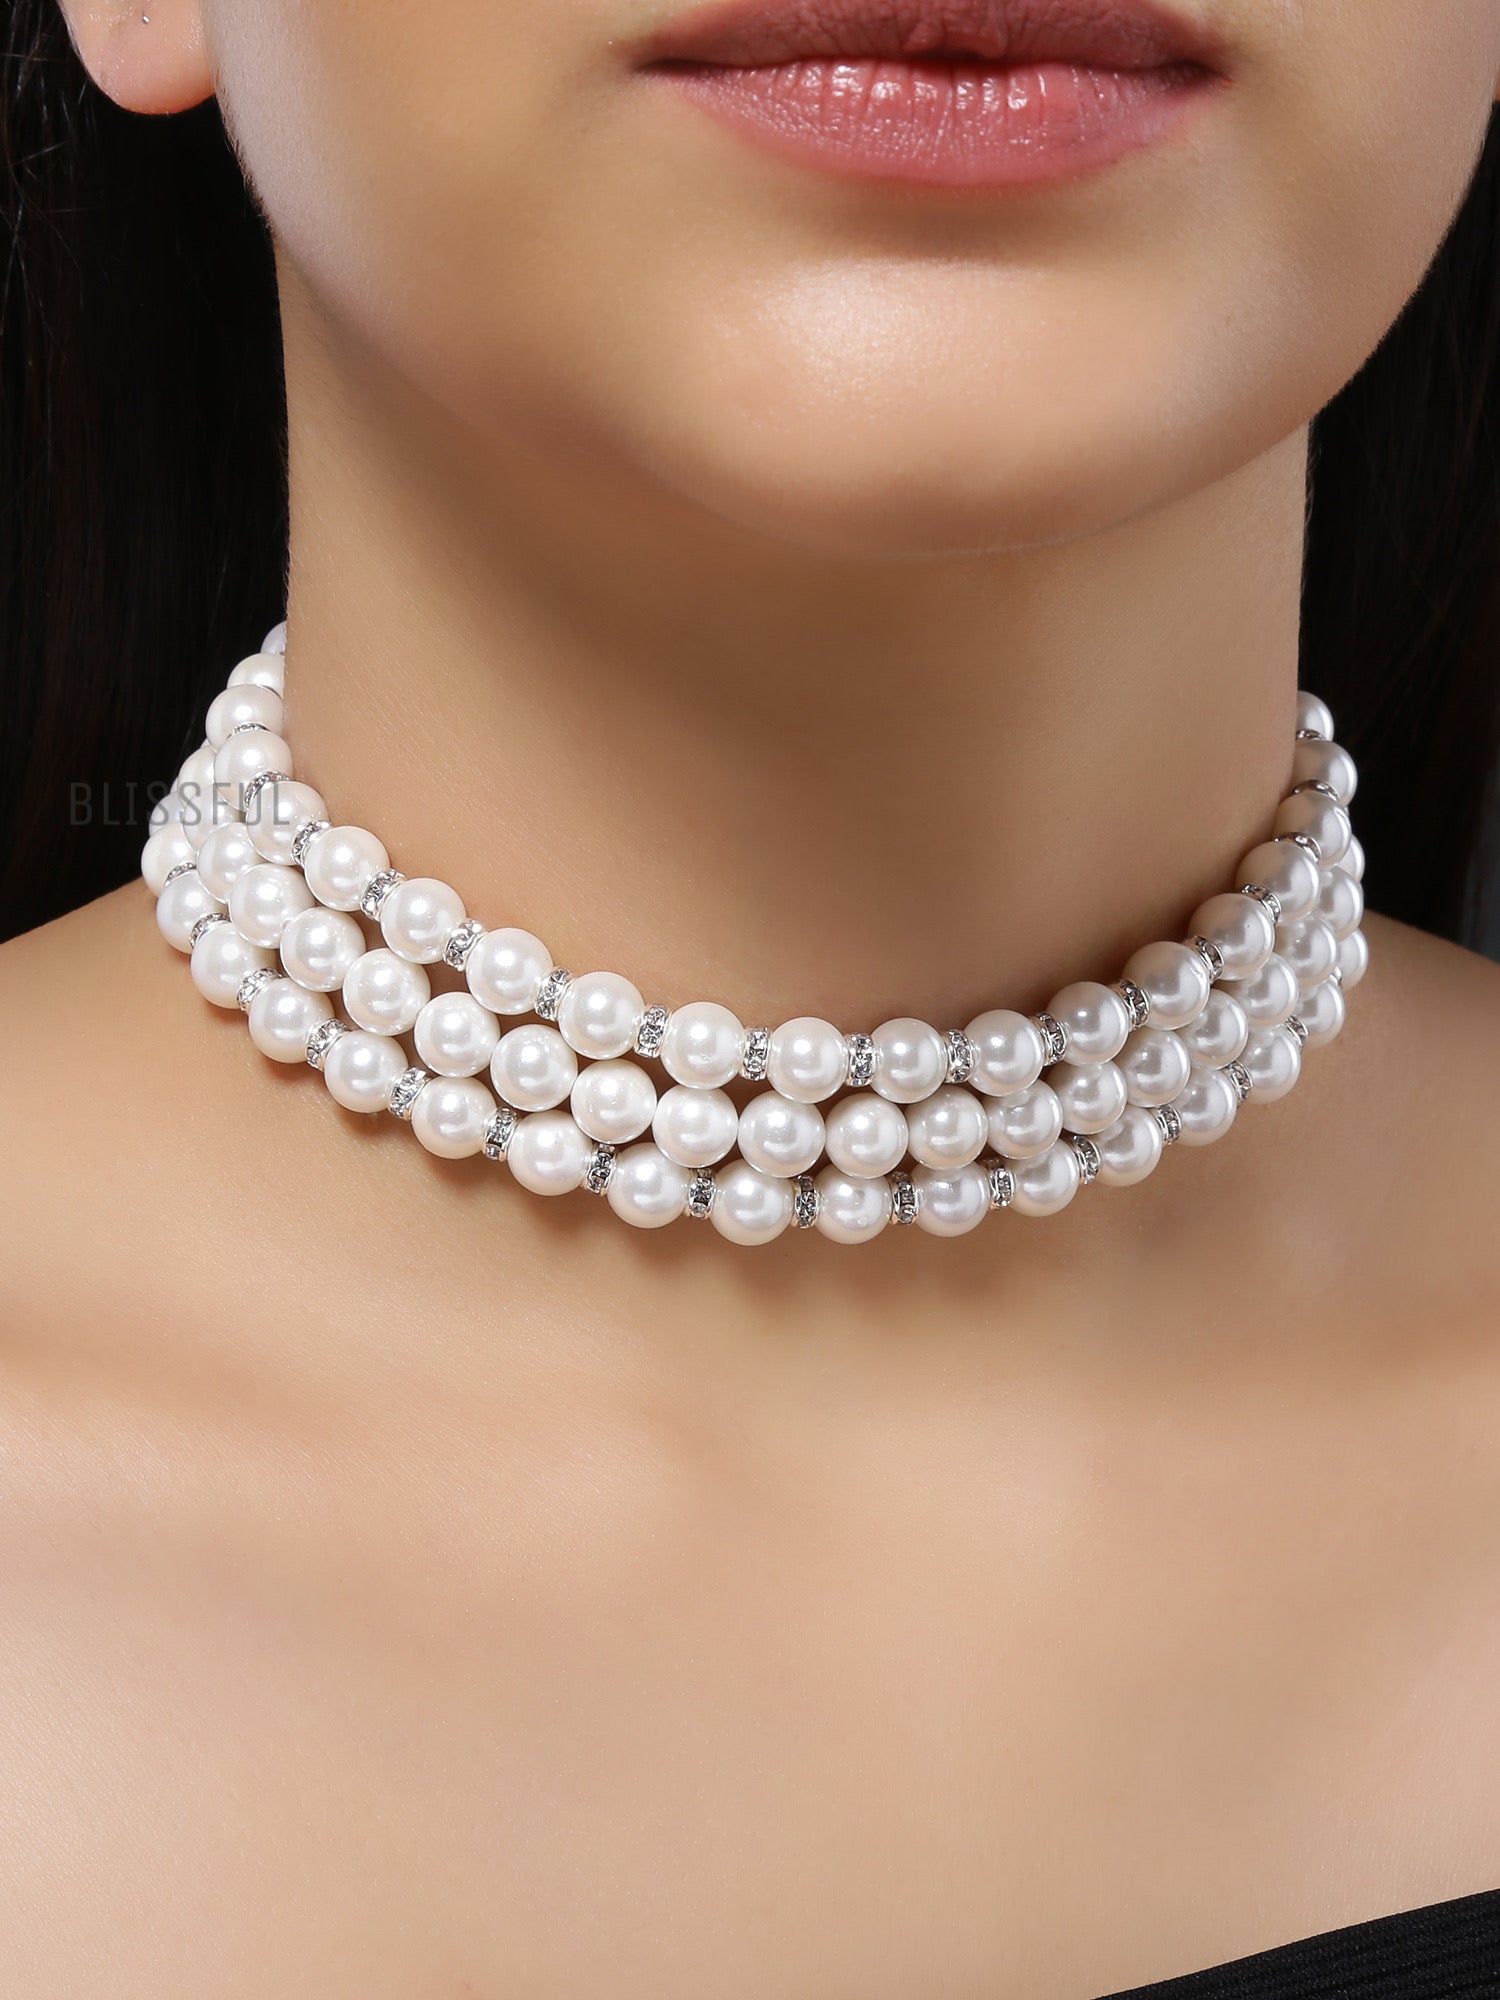 The story behind the pearl necklace which the Duchess of Cambridge borrowed  from The Queen last night